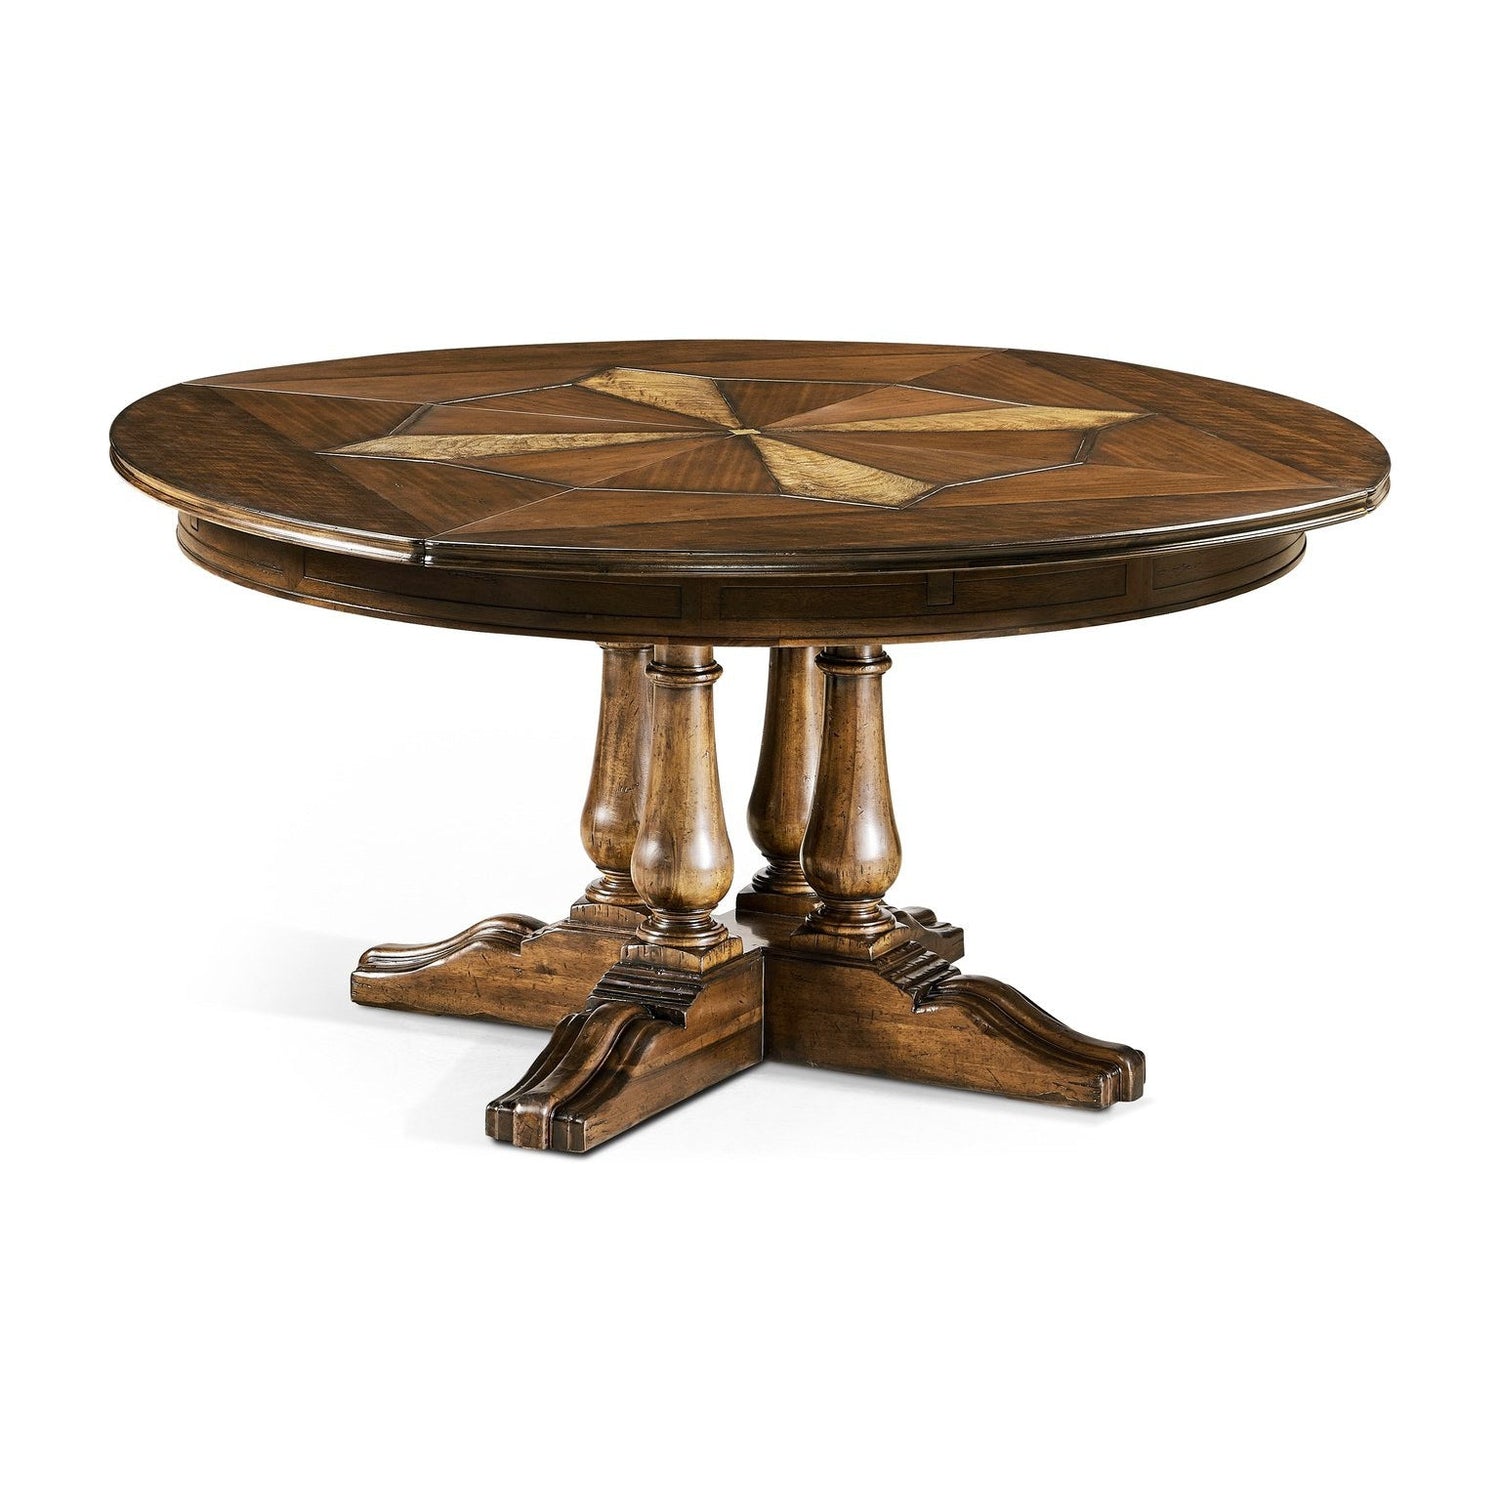 Jonathan Charles, 59" Round country extending dining table